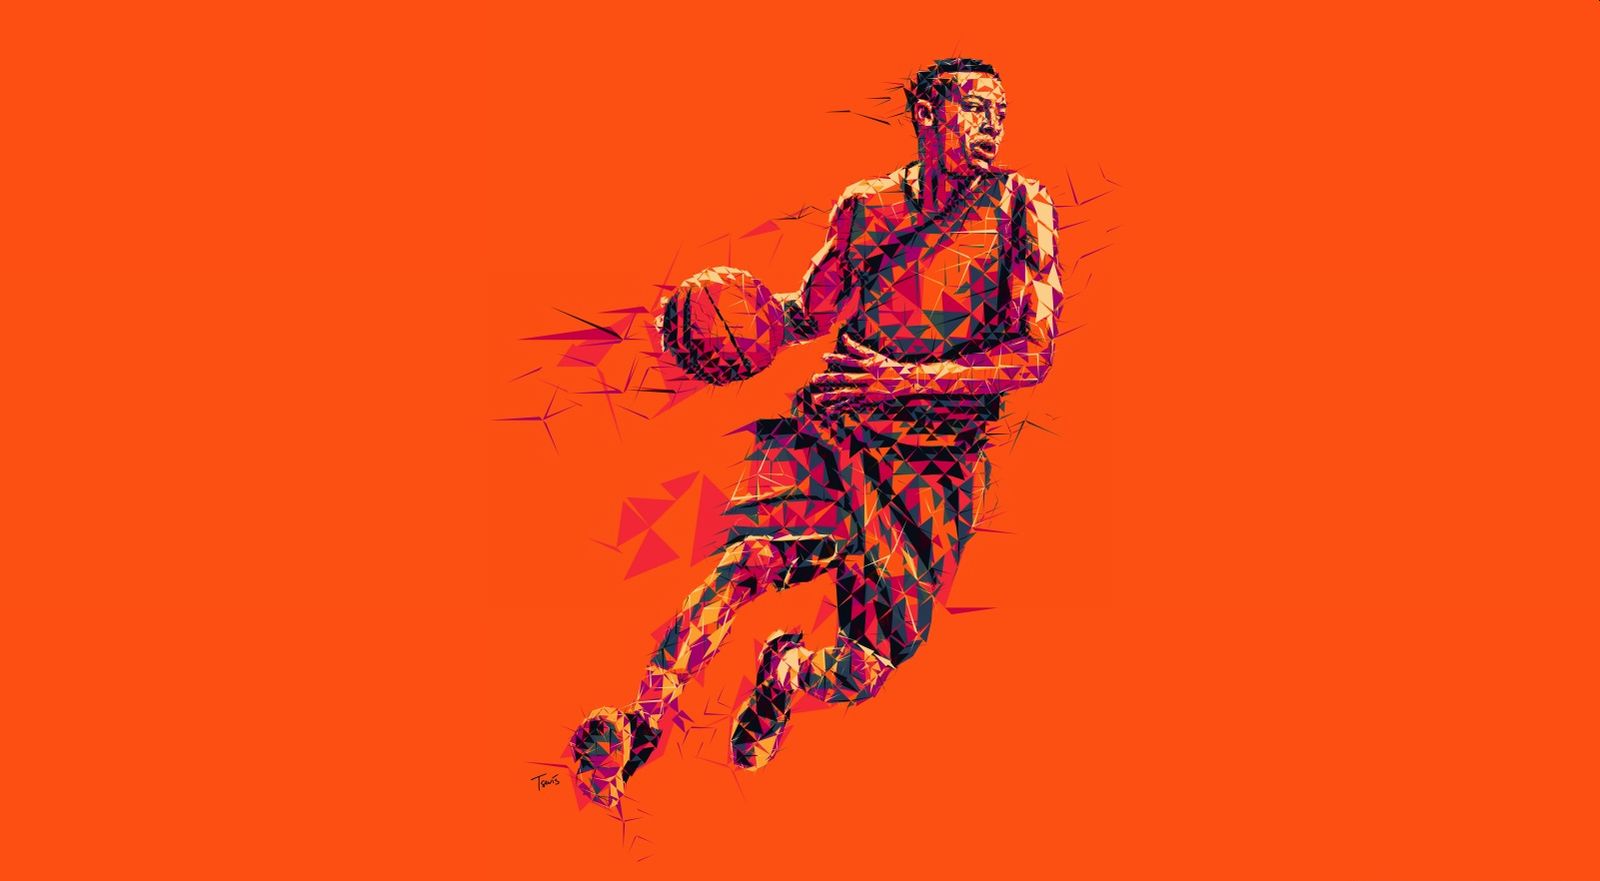 Full HD Basketball Wallpaper For All The Devices